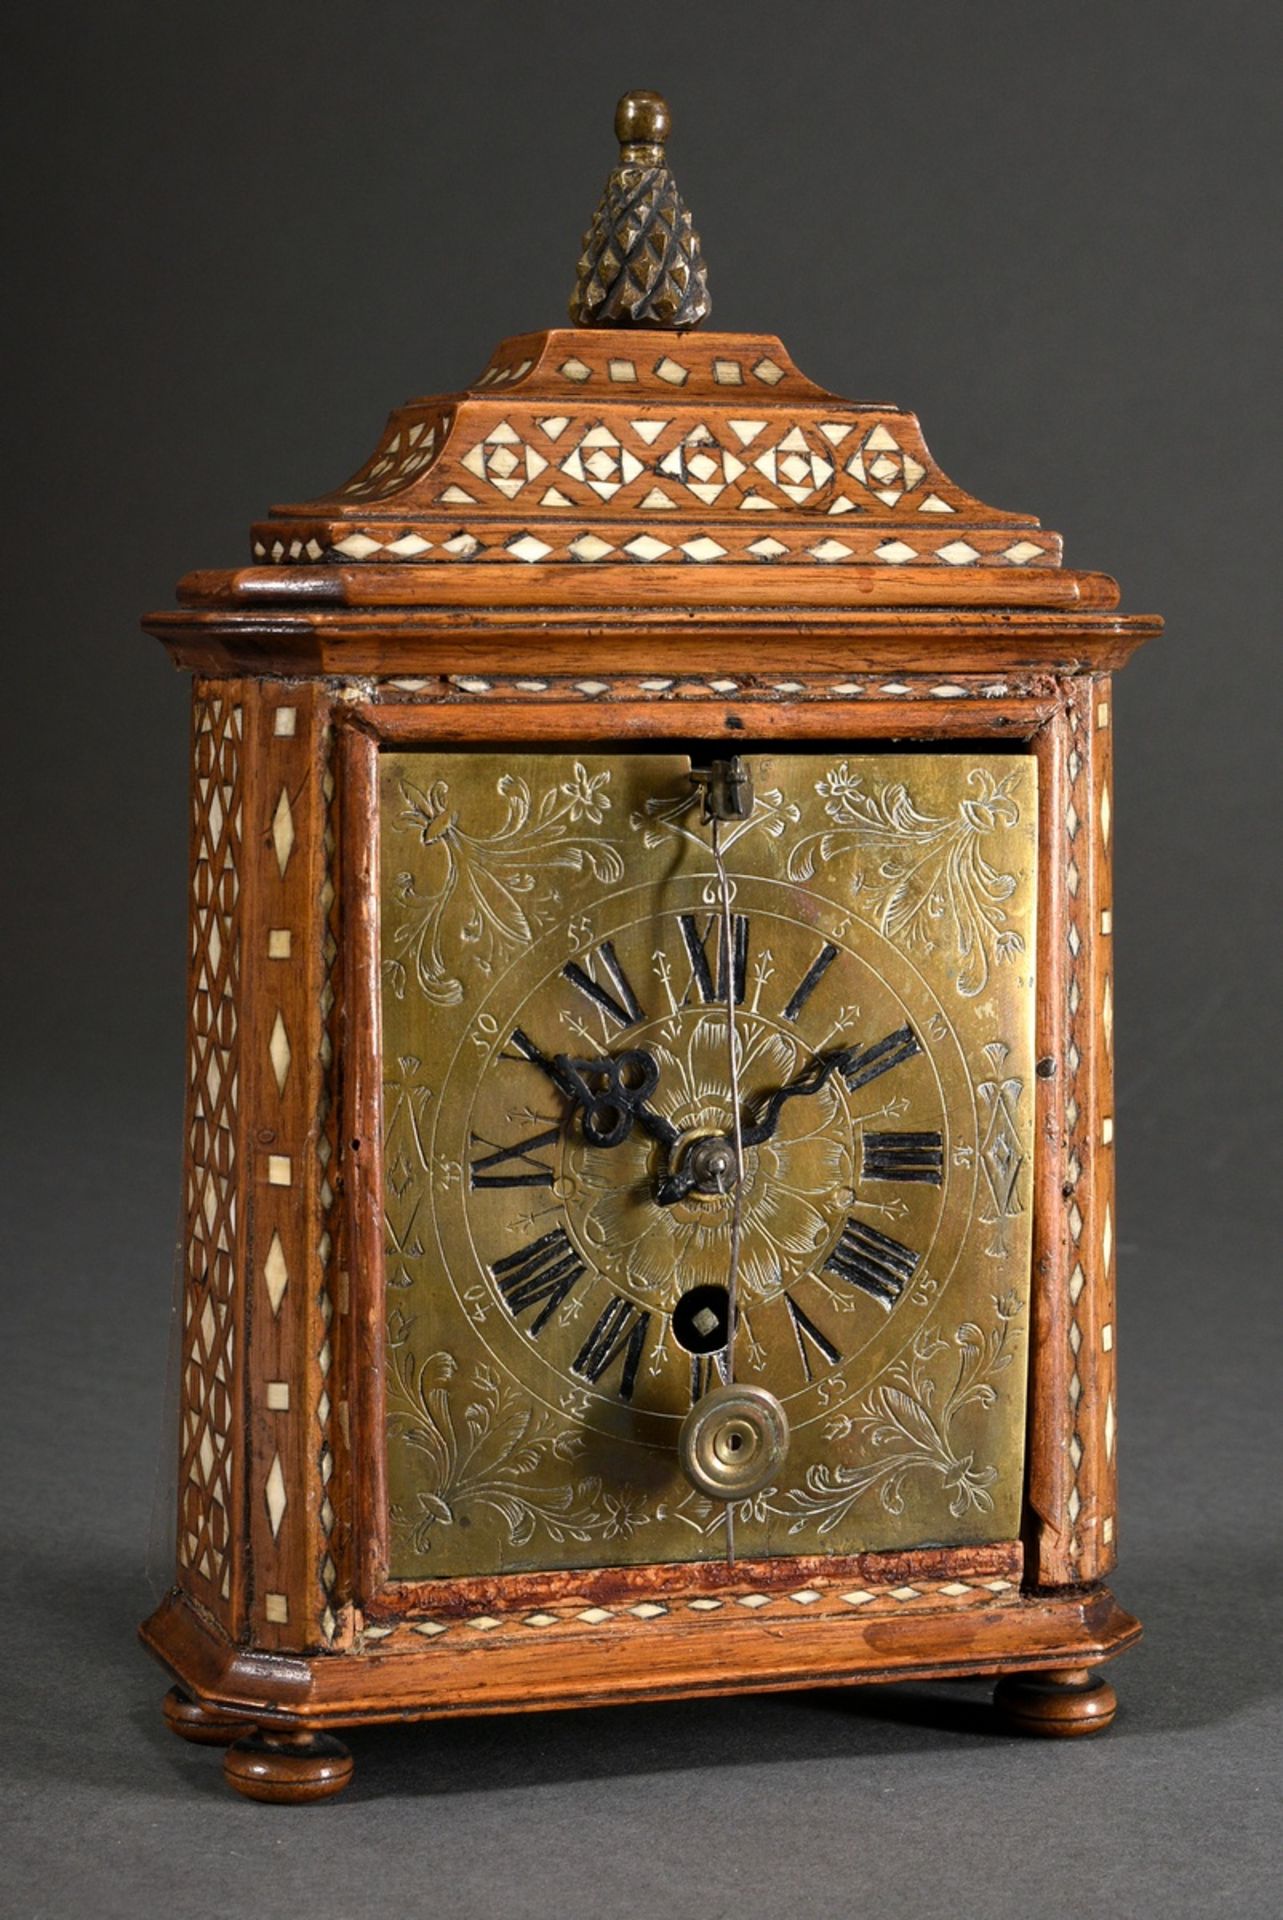 Small Vorderzappler clock in fruitwood case with geometric bone inlays and pineapple crown, florall